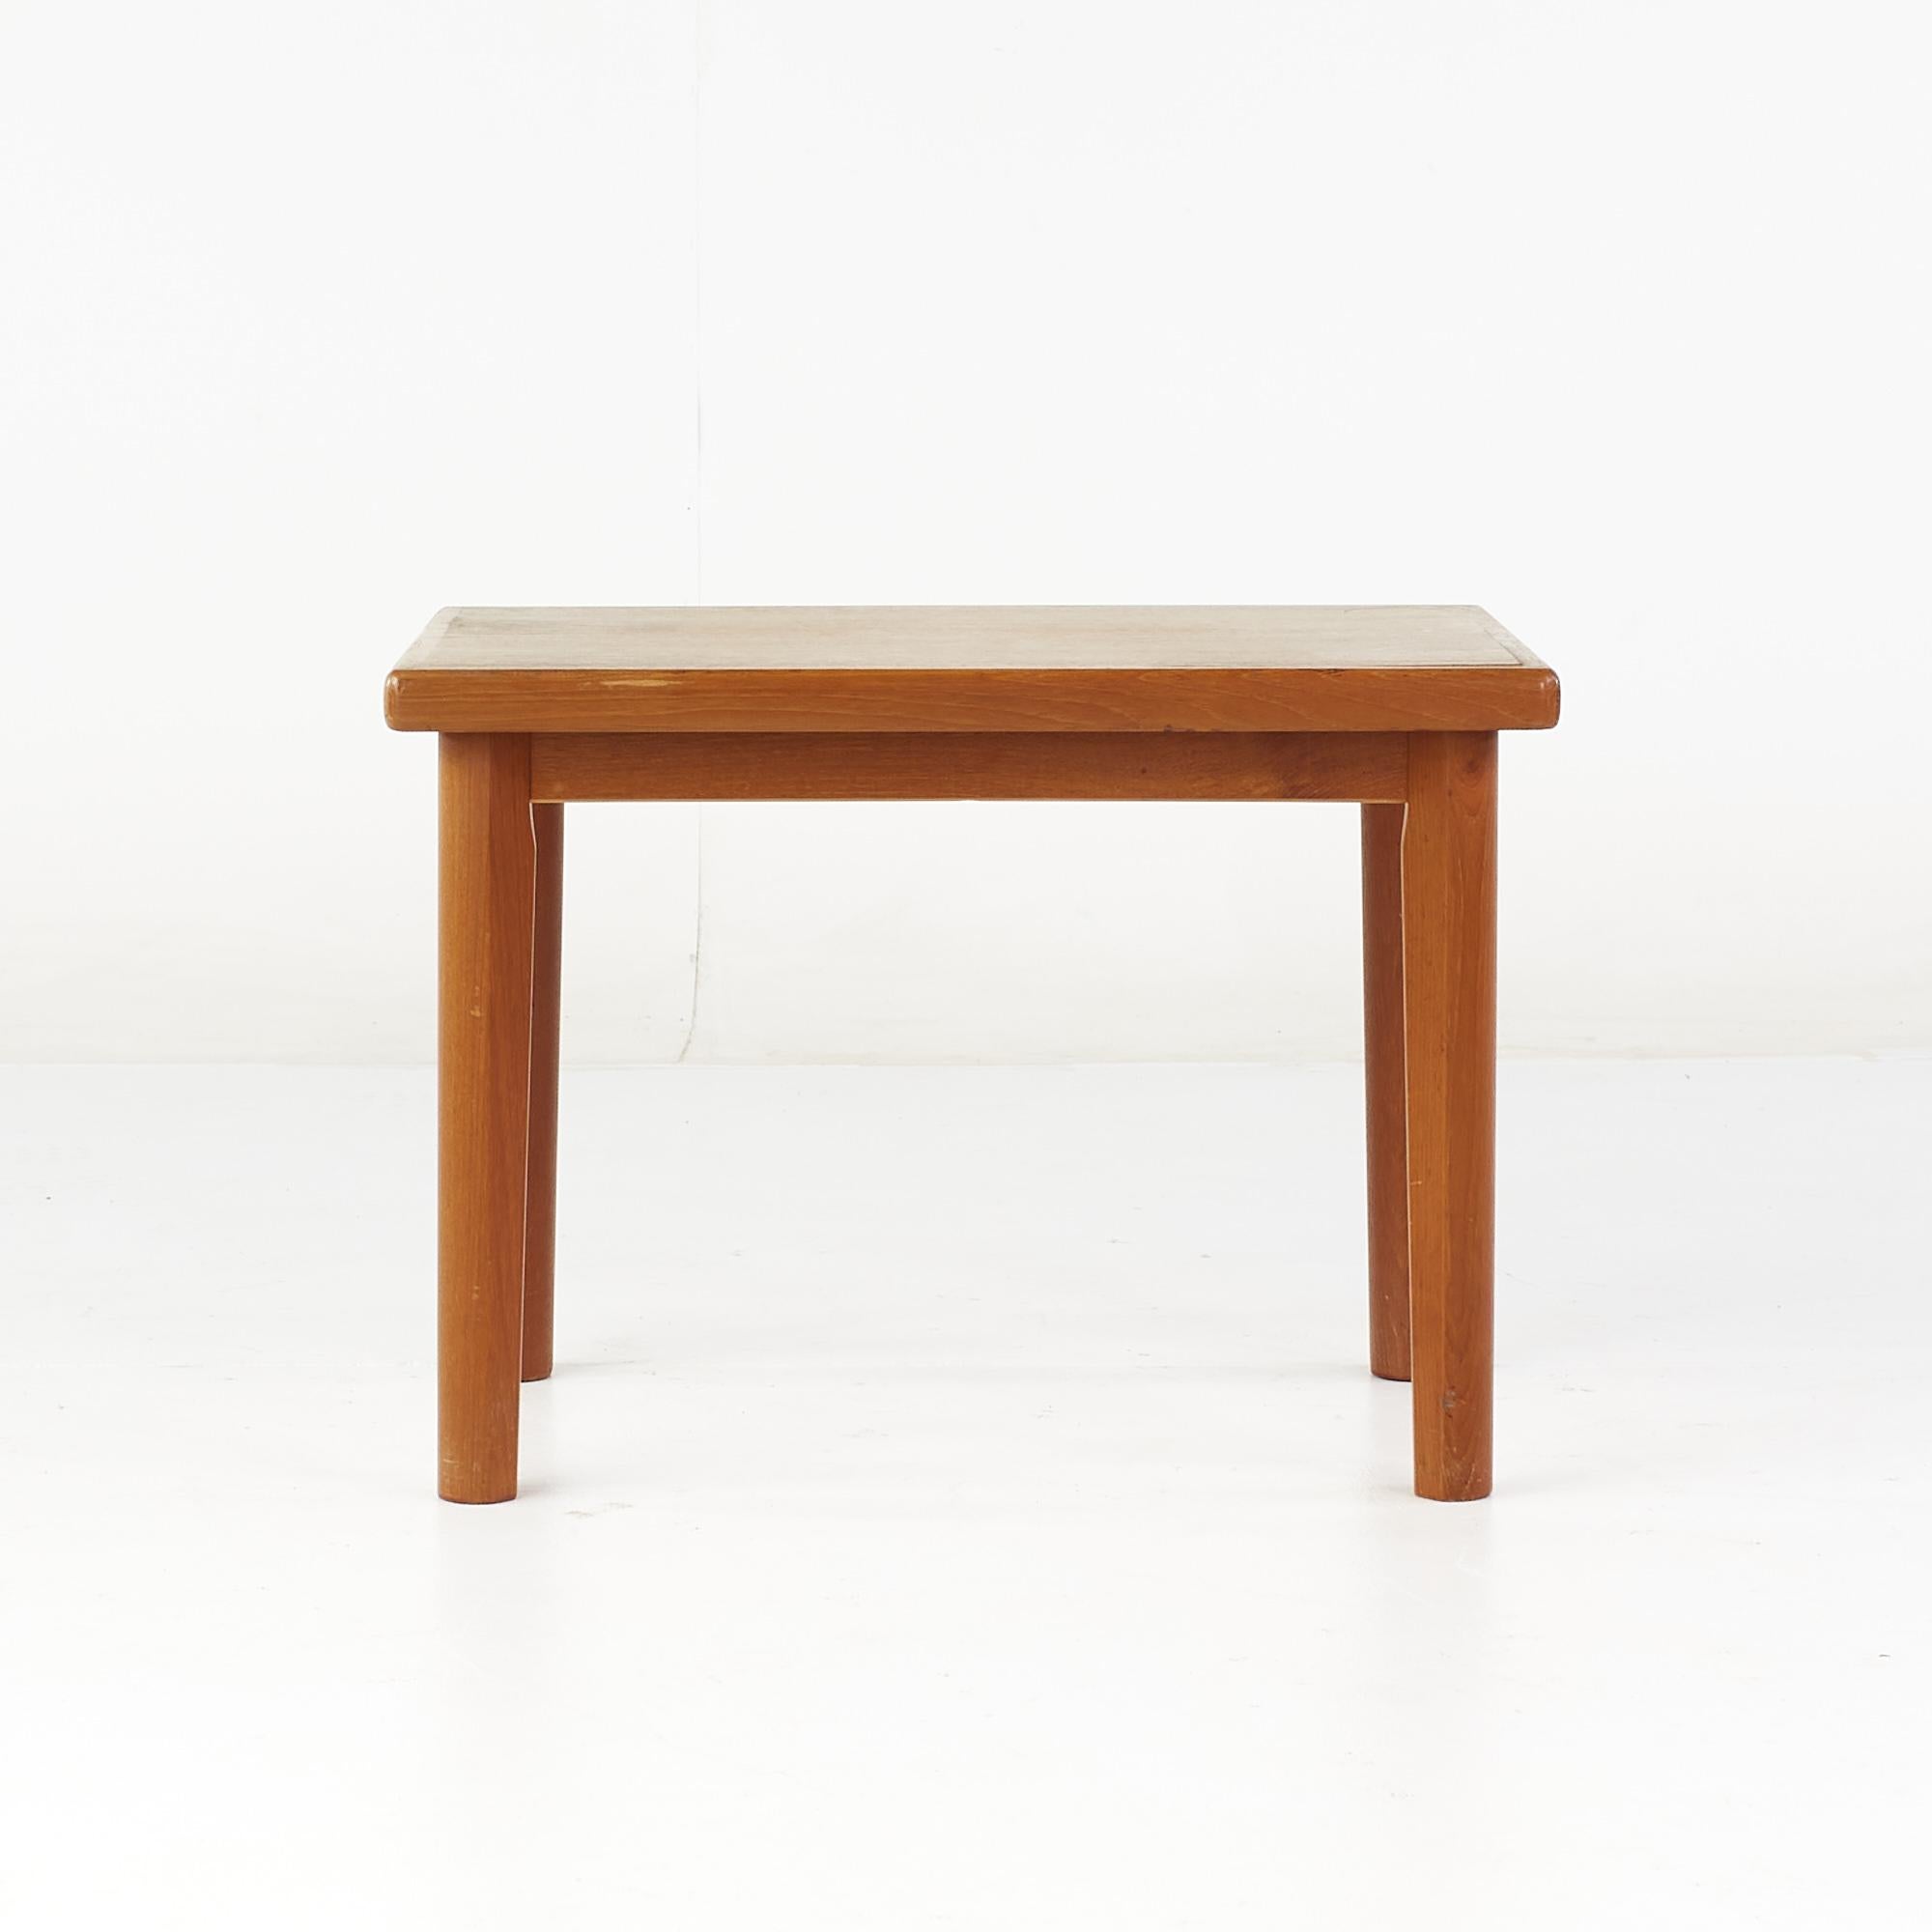 BRDR Furbo Mid Century Danish Teak Side Table

This table measures: 25.5 wide x 17.75 deep x 18.5 inches high

All pieces of furniture can be had in what we call restored vintage condition. That means the piece is restored upon purchase so it’s free